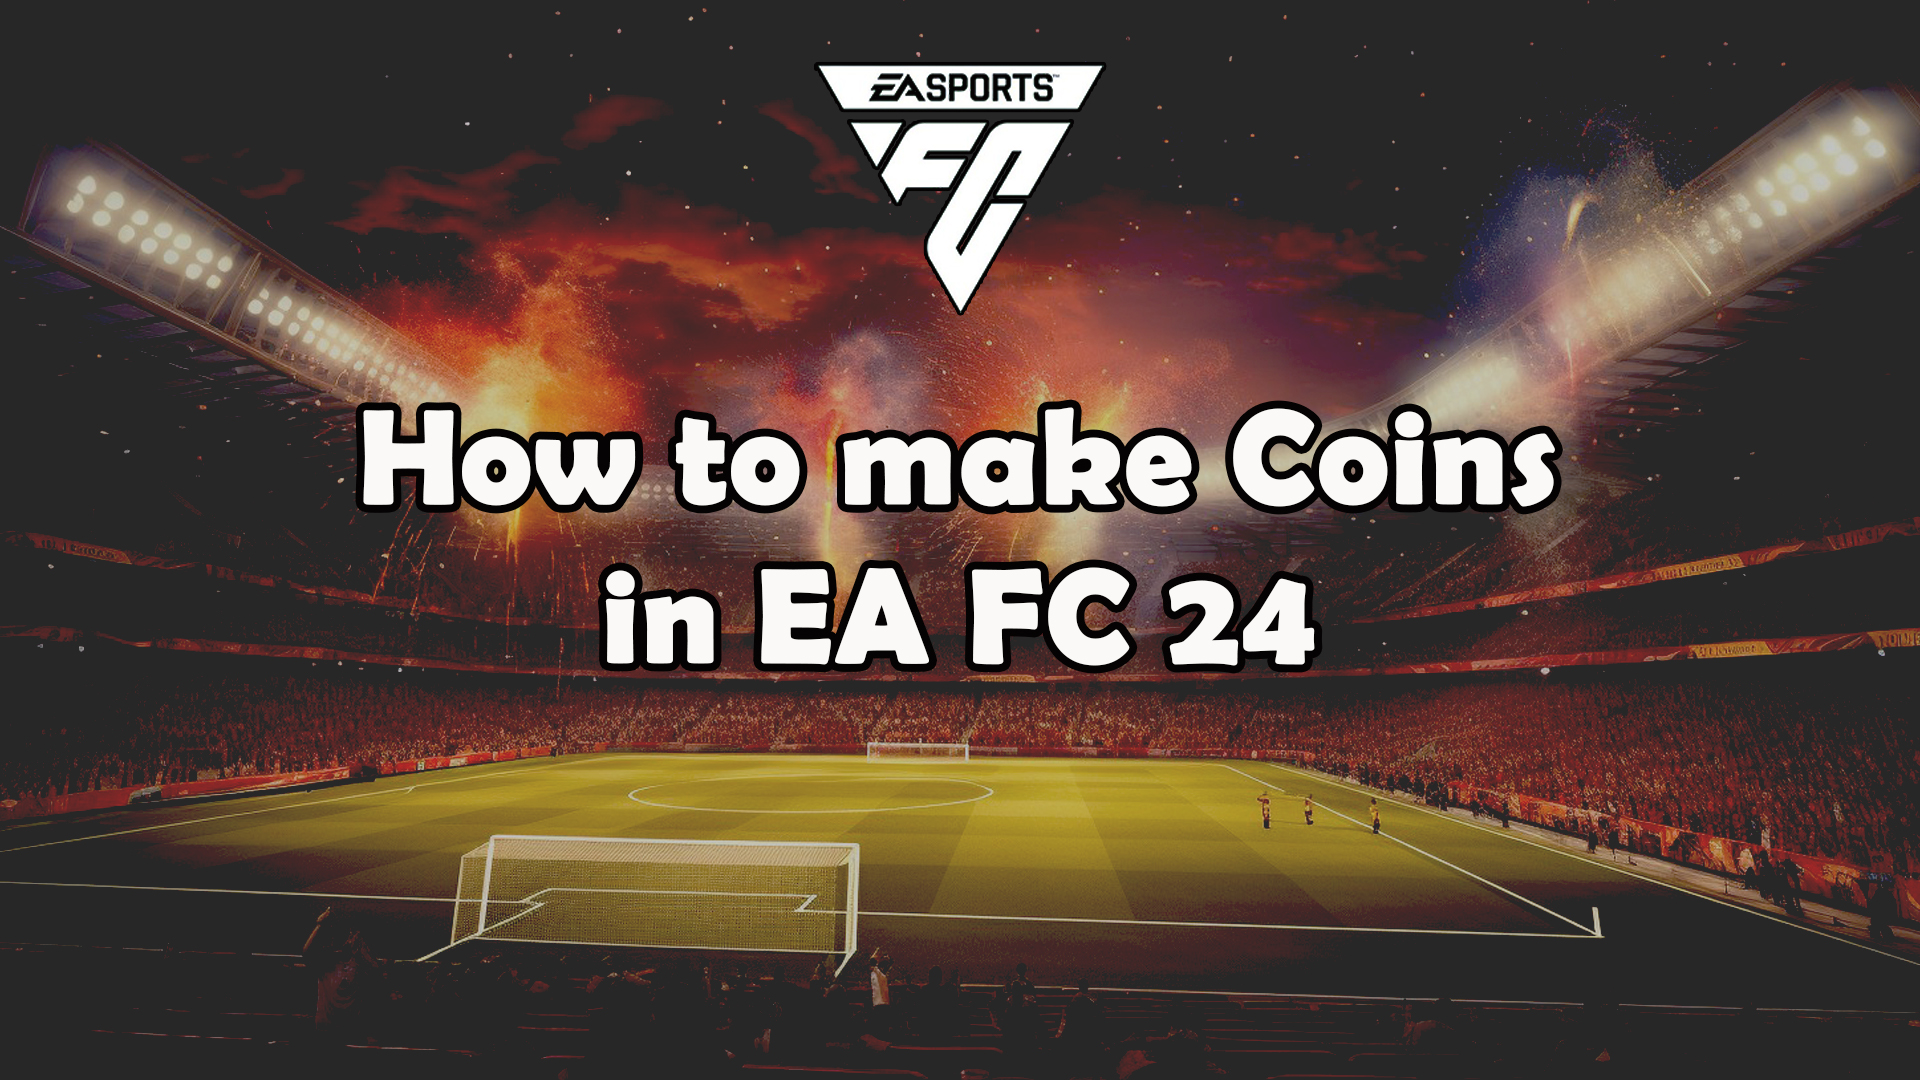 how to make coins in ea fc 24